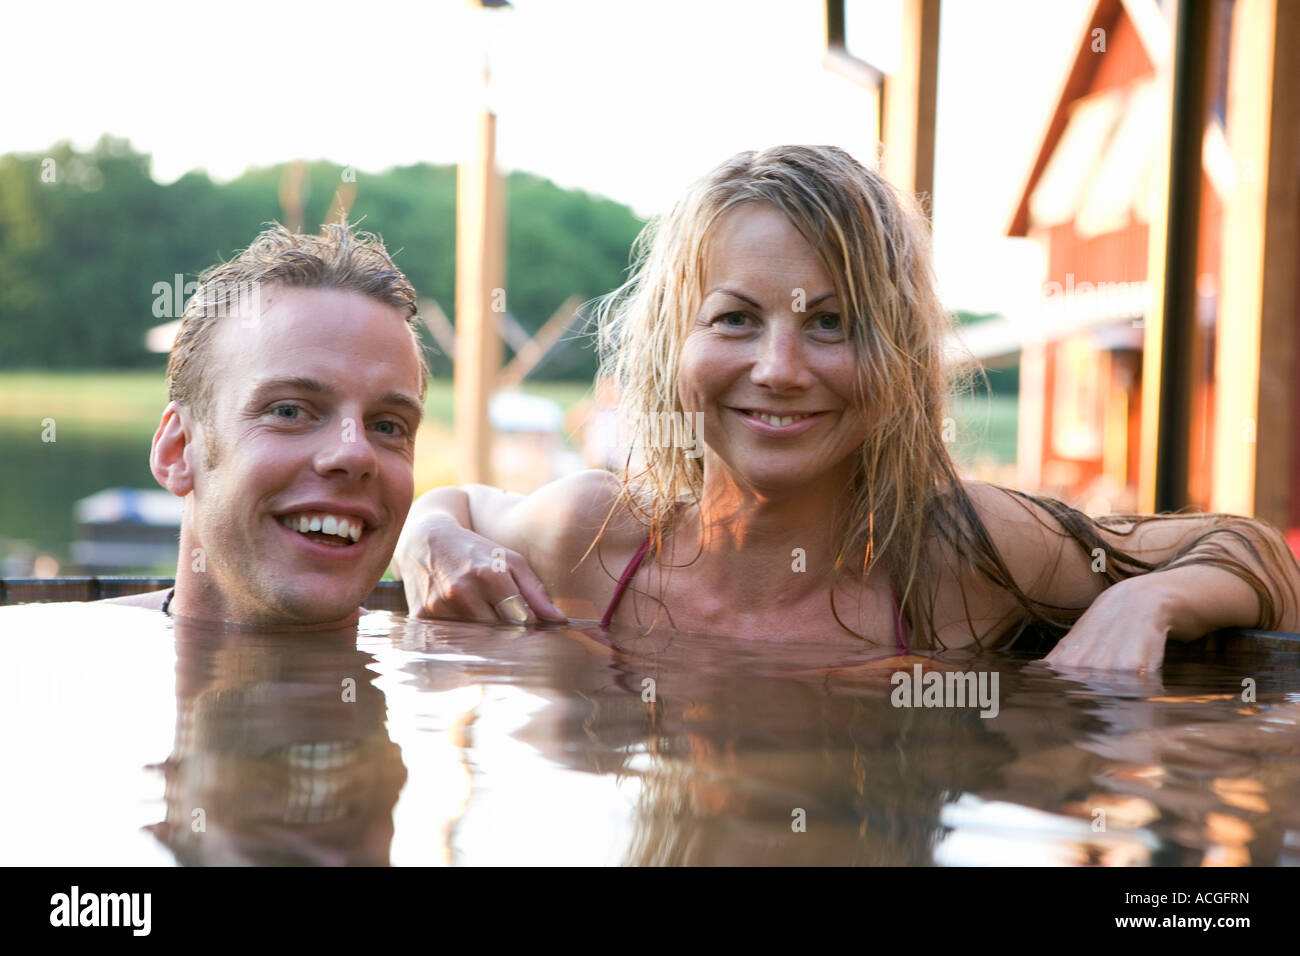 A man and a woman bathing in a barrel outdoors. Stock Photo